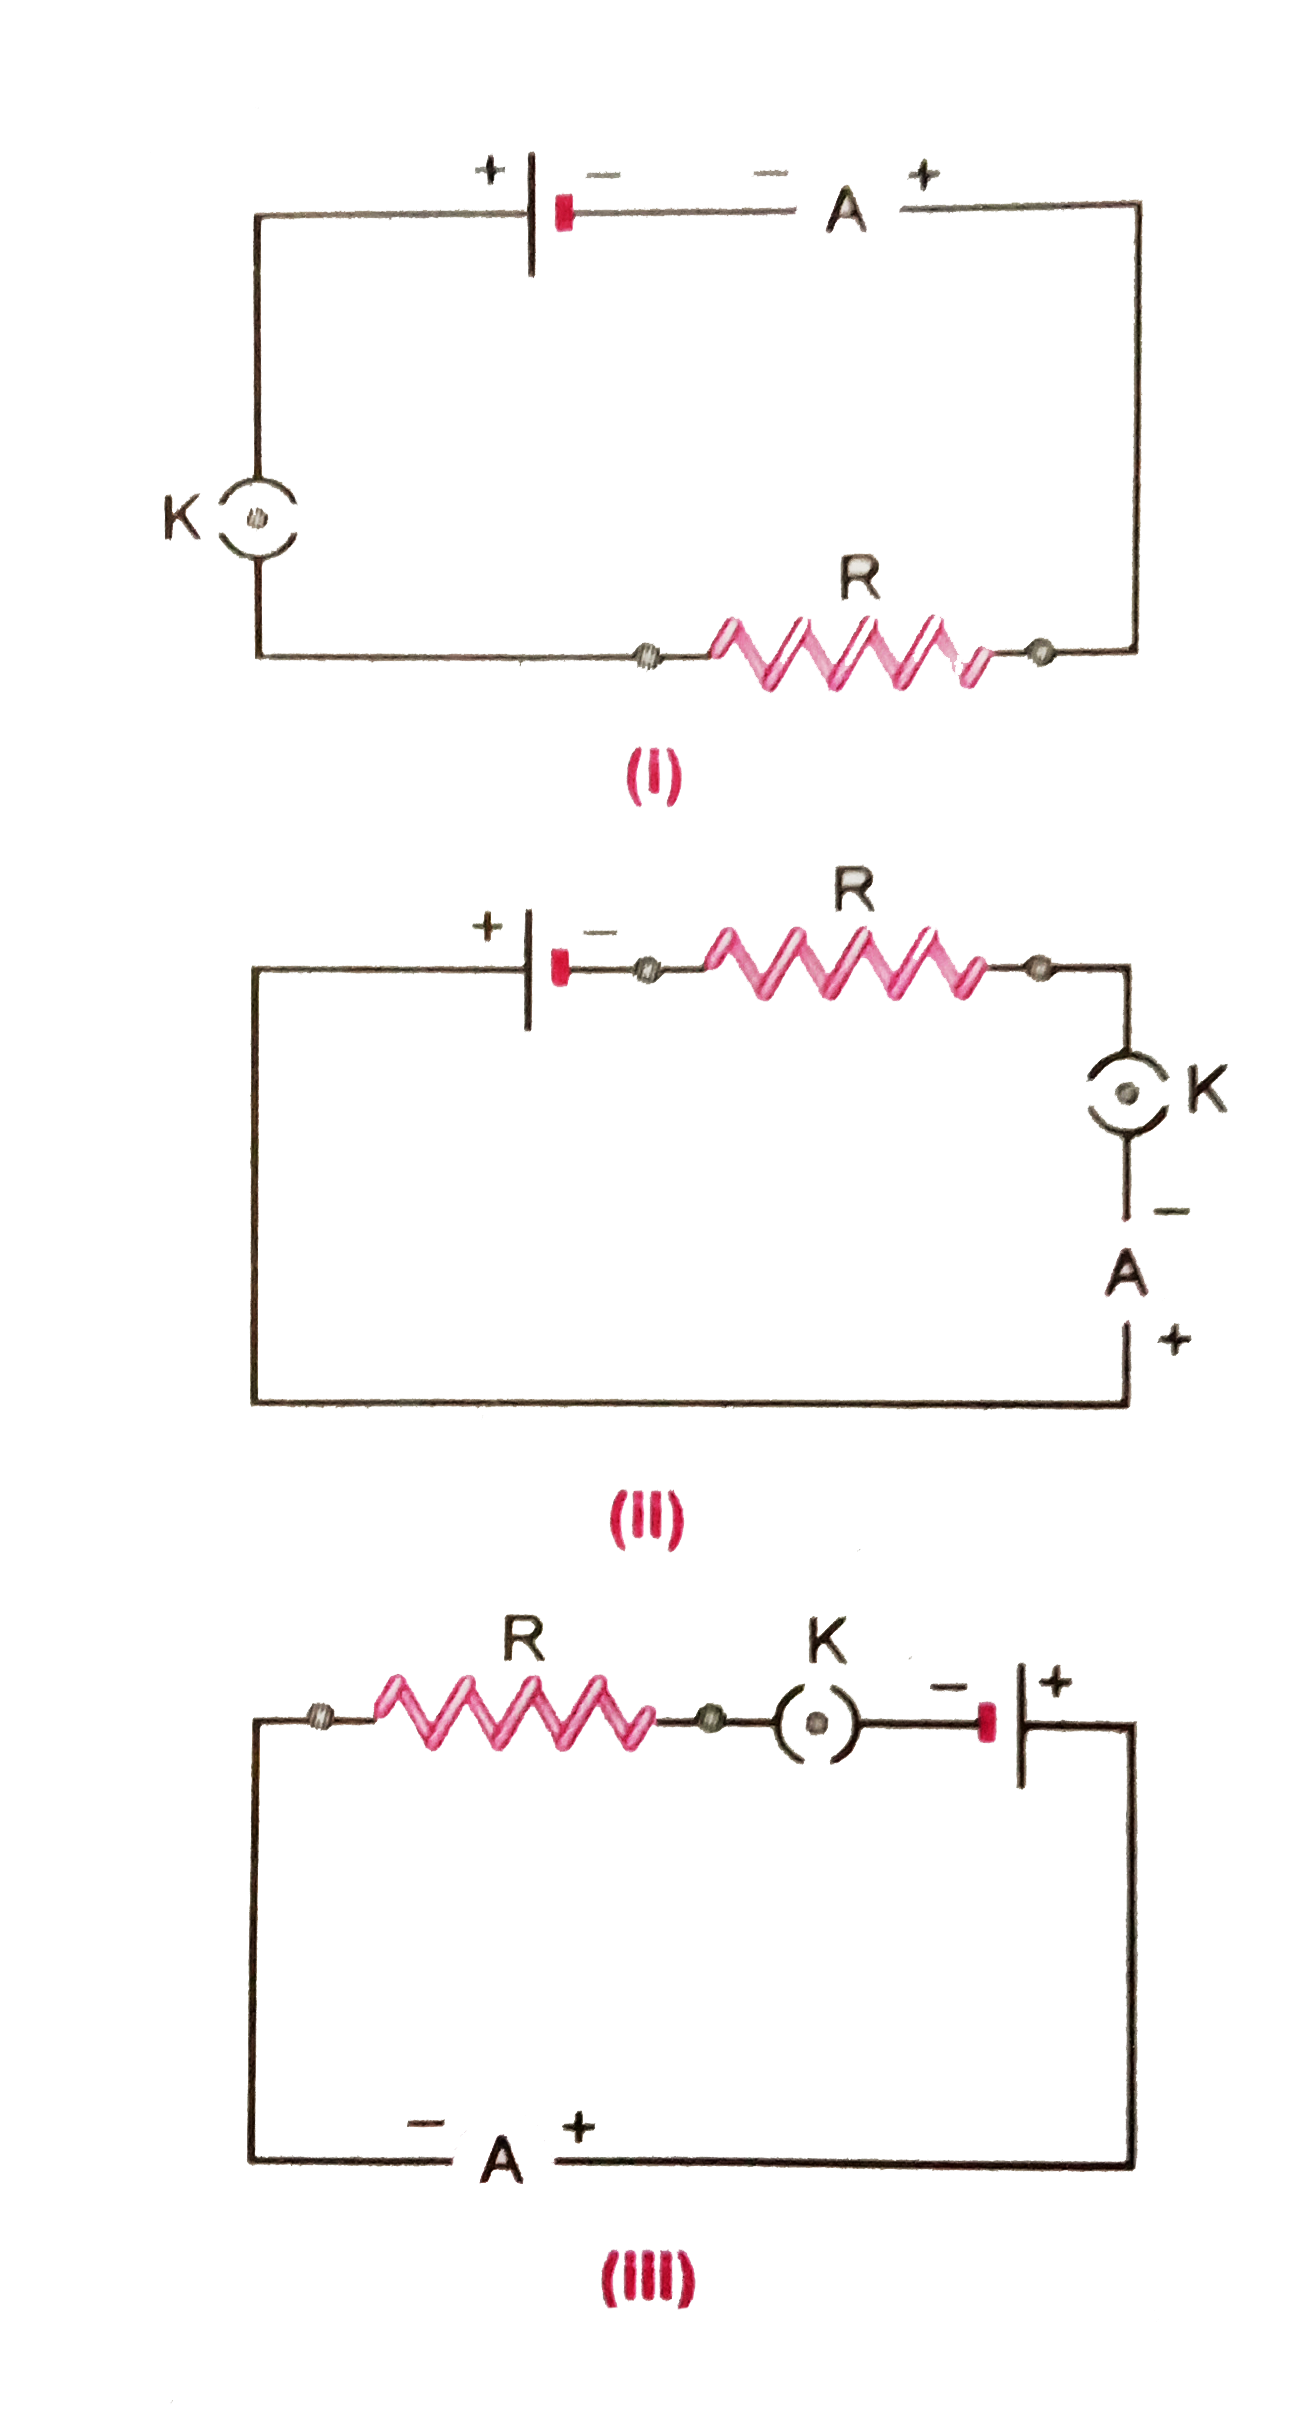 A cell, a resistor, a key and an ammeter are arranged as shown in the circuit diagrams of (Fig. 3.37). The current recorded in the ammeter will be :